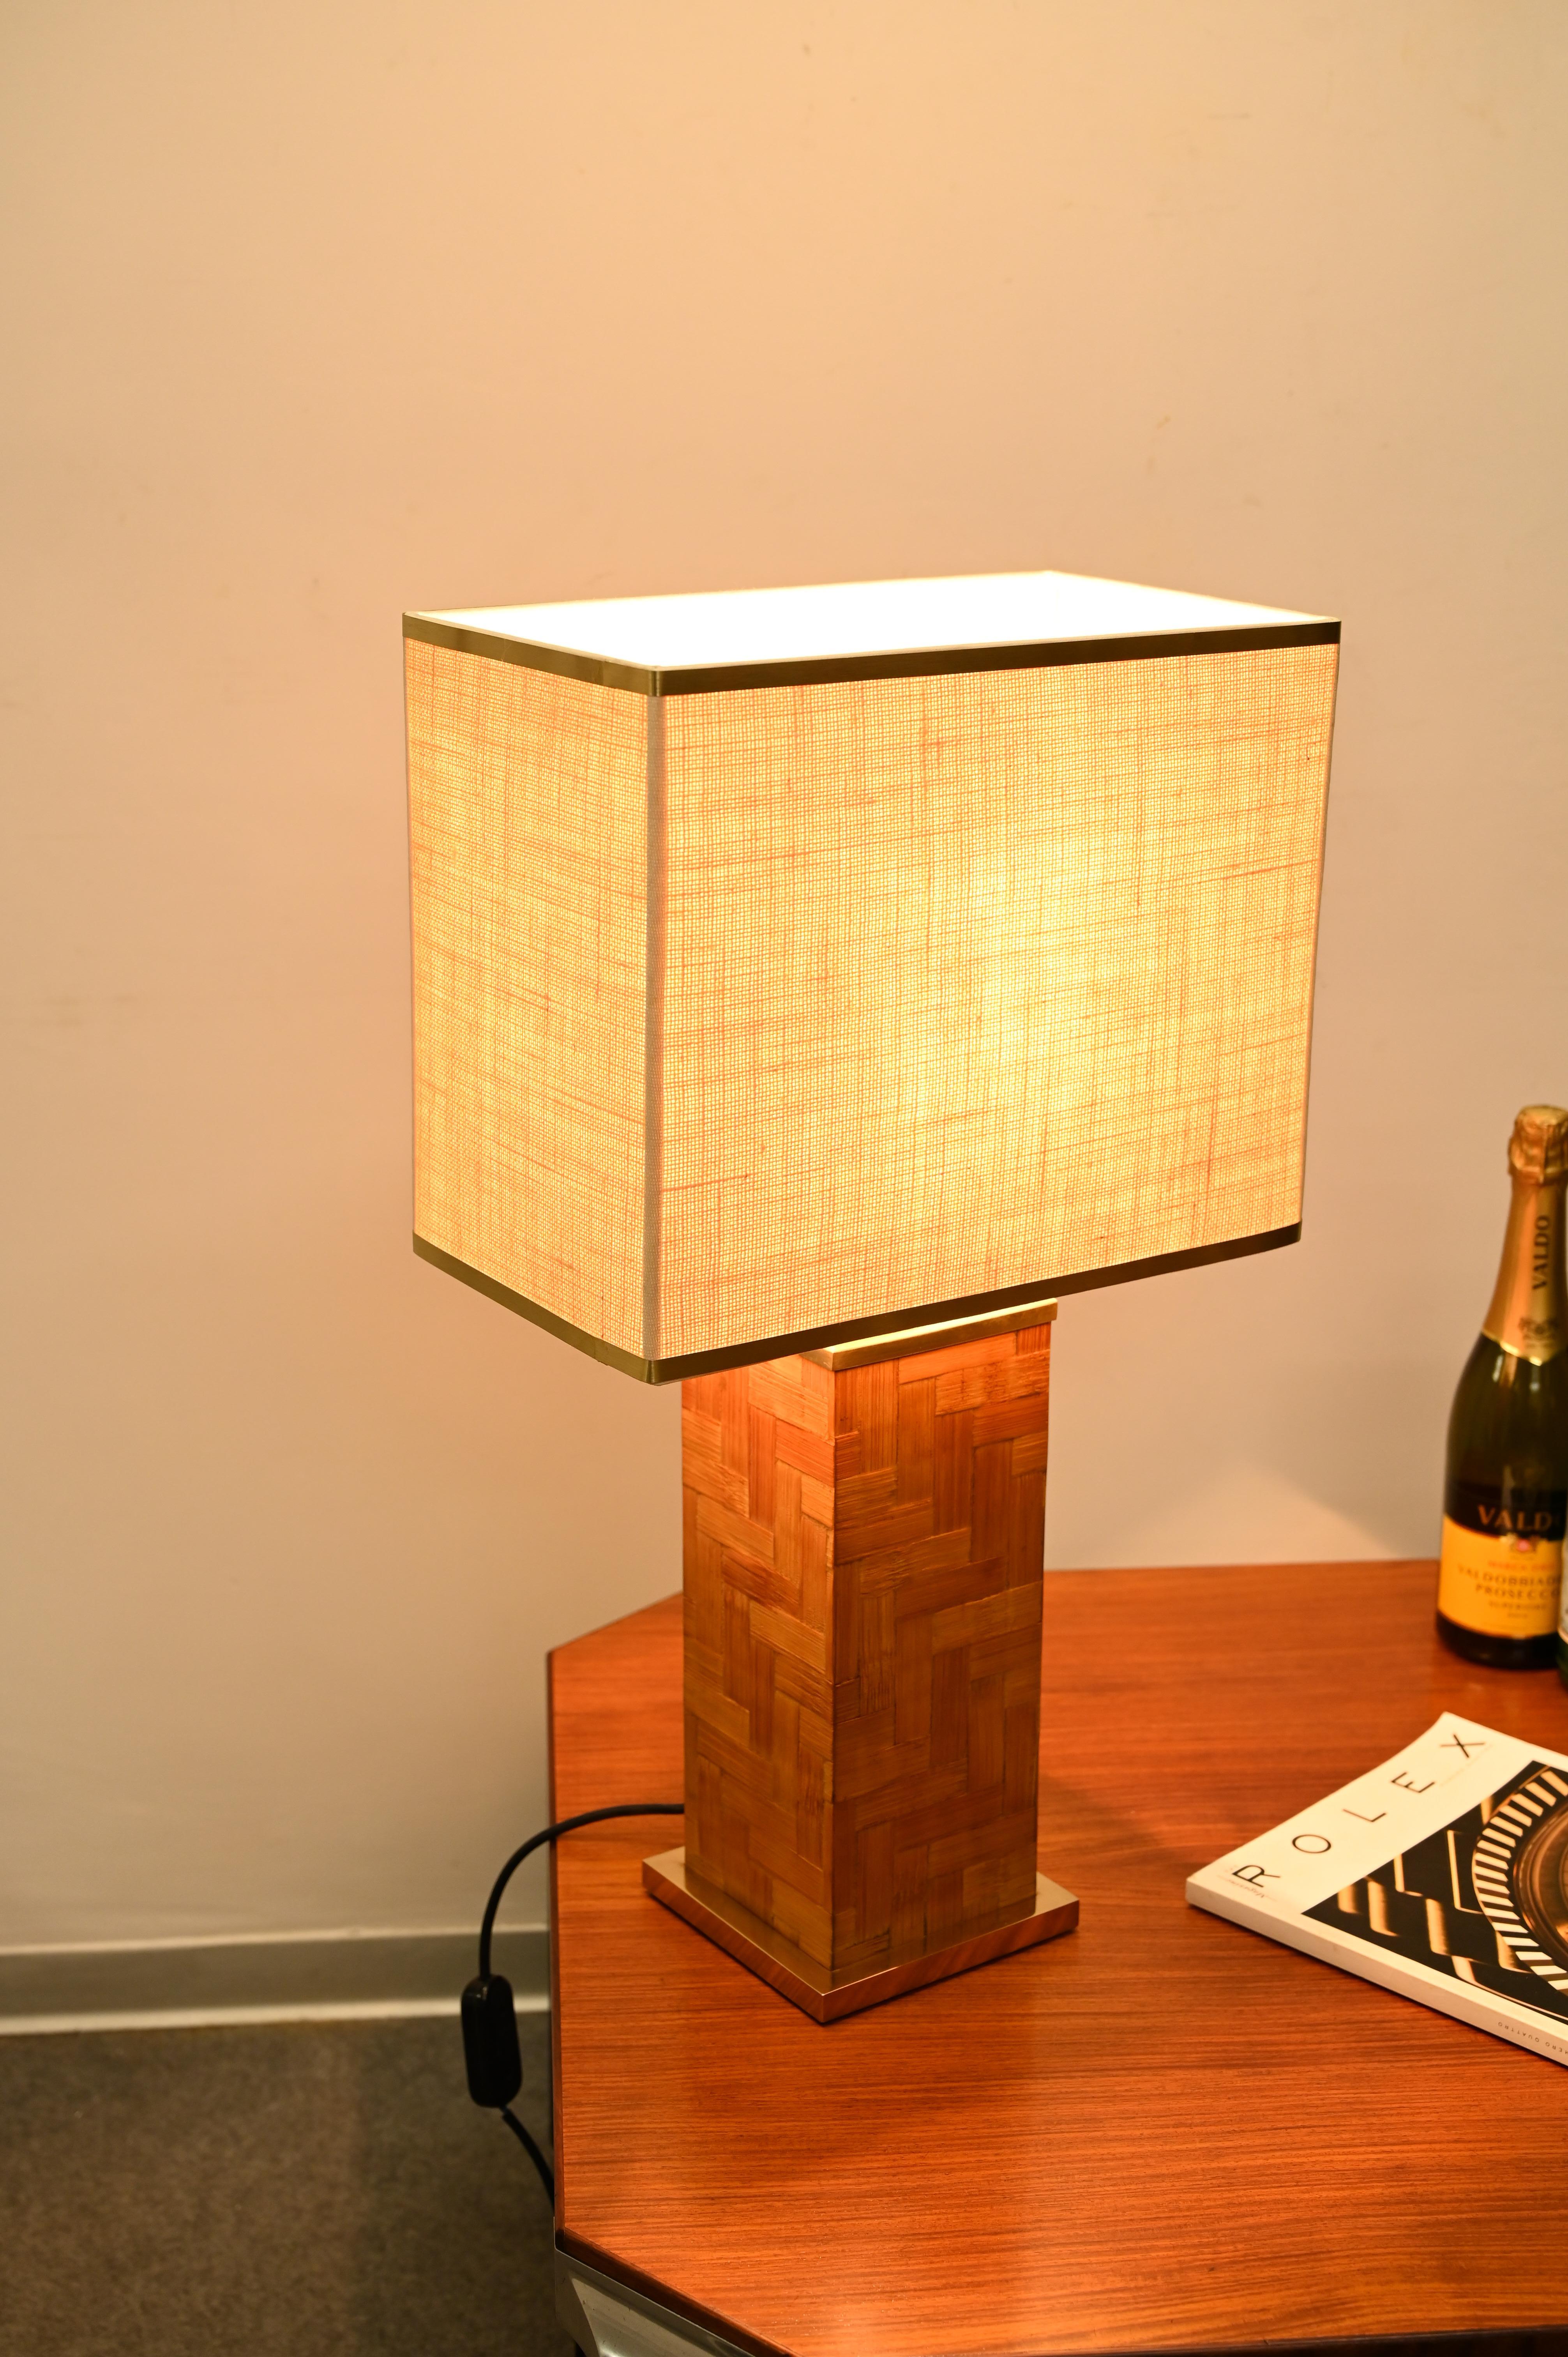 Wonderful square table lamp in brass and rattan produced with excellent workmanship. The gorgeous lamp was produced after Tommaso Barbi in Italy during 1970s.

The lamp features a square base in polished brass and woven rattan. The lampshade is in a